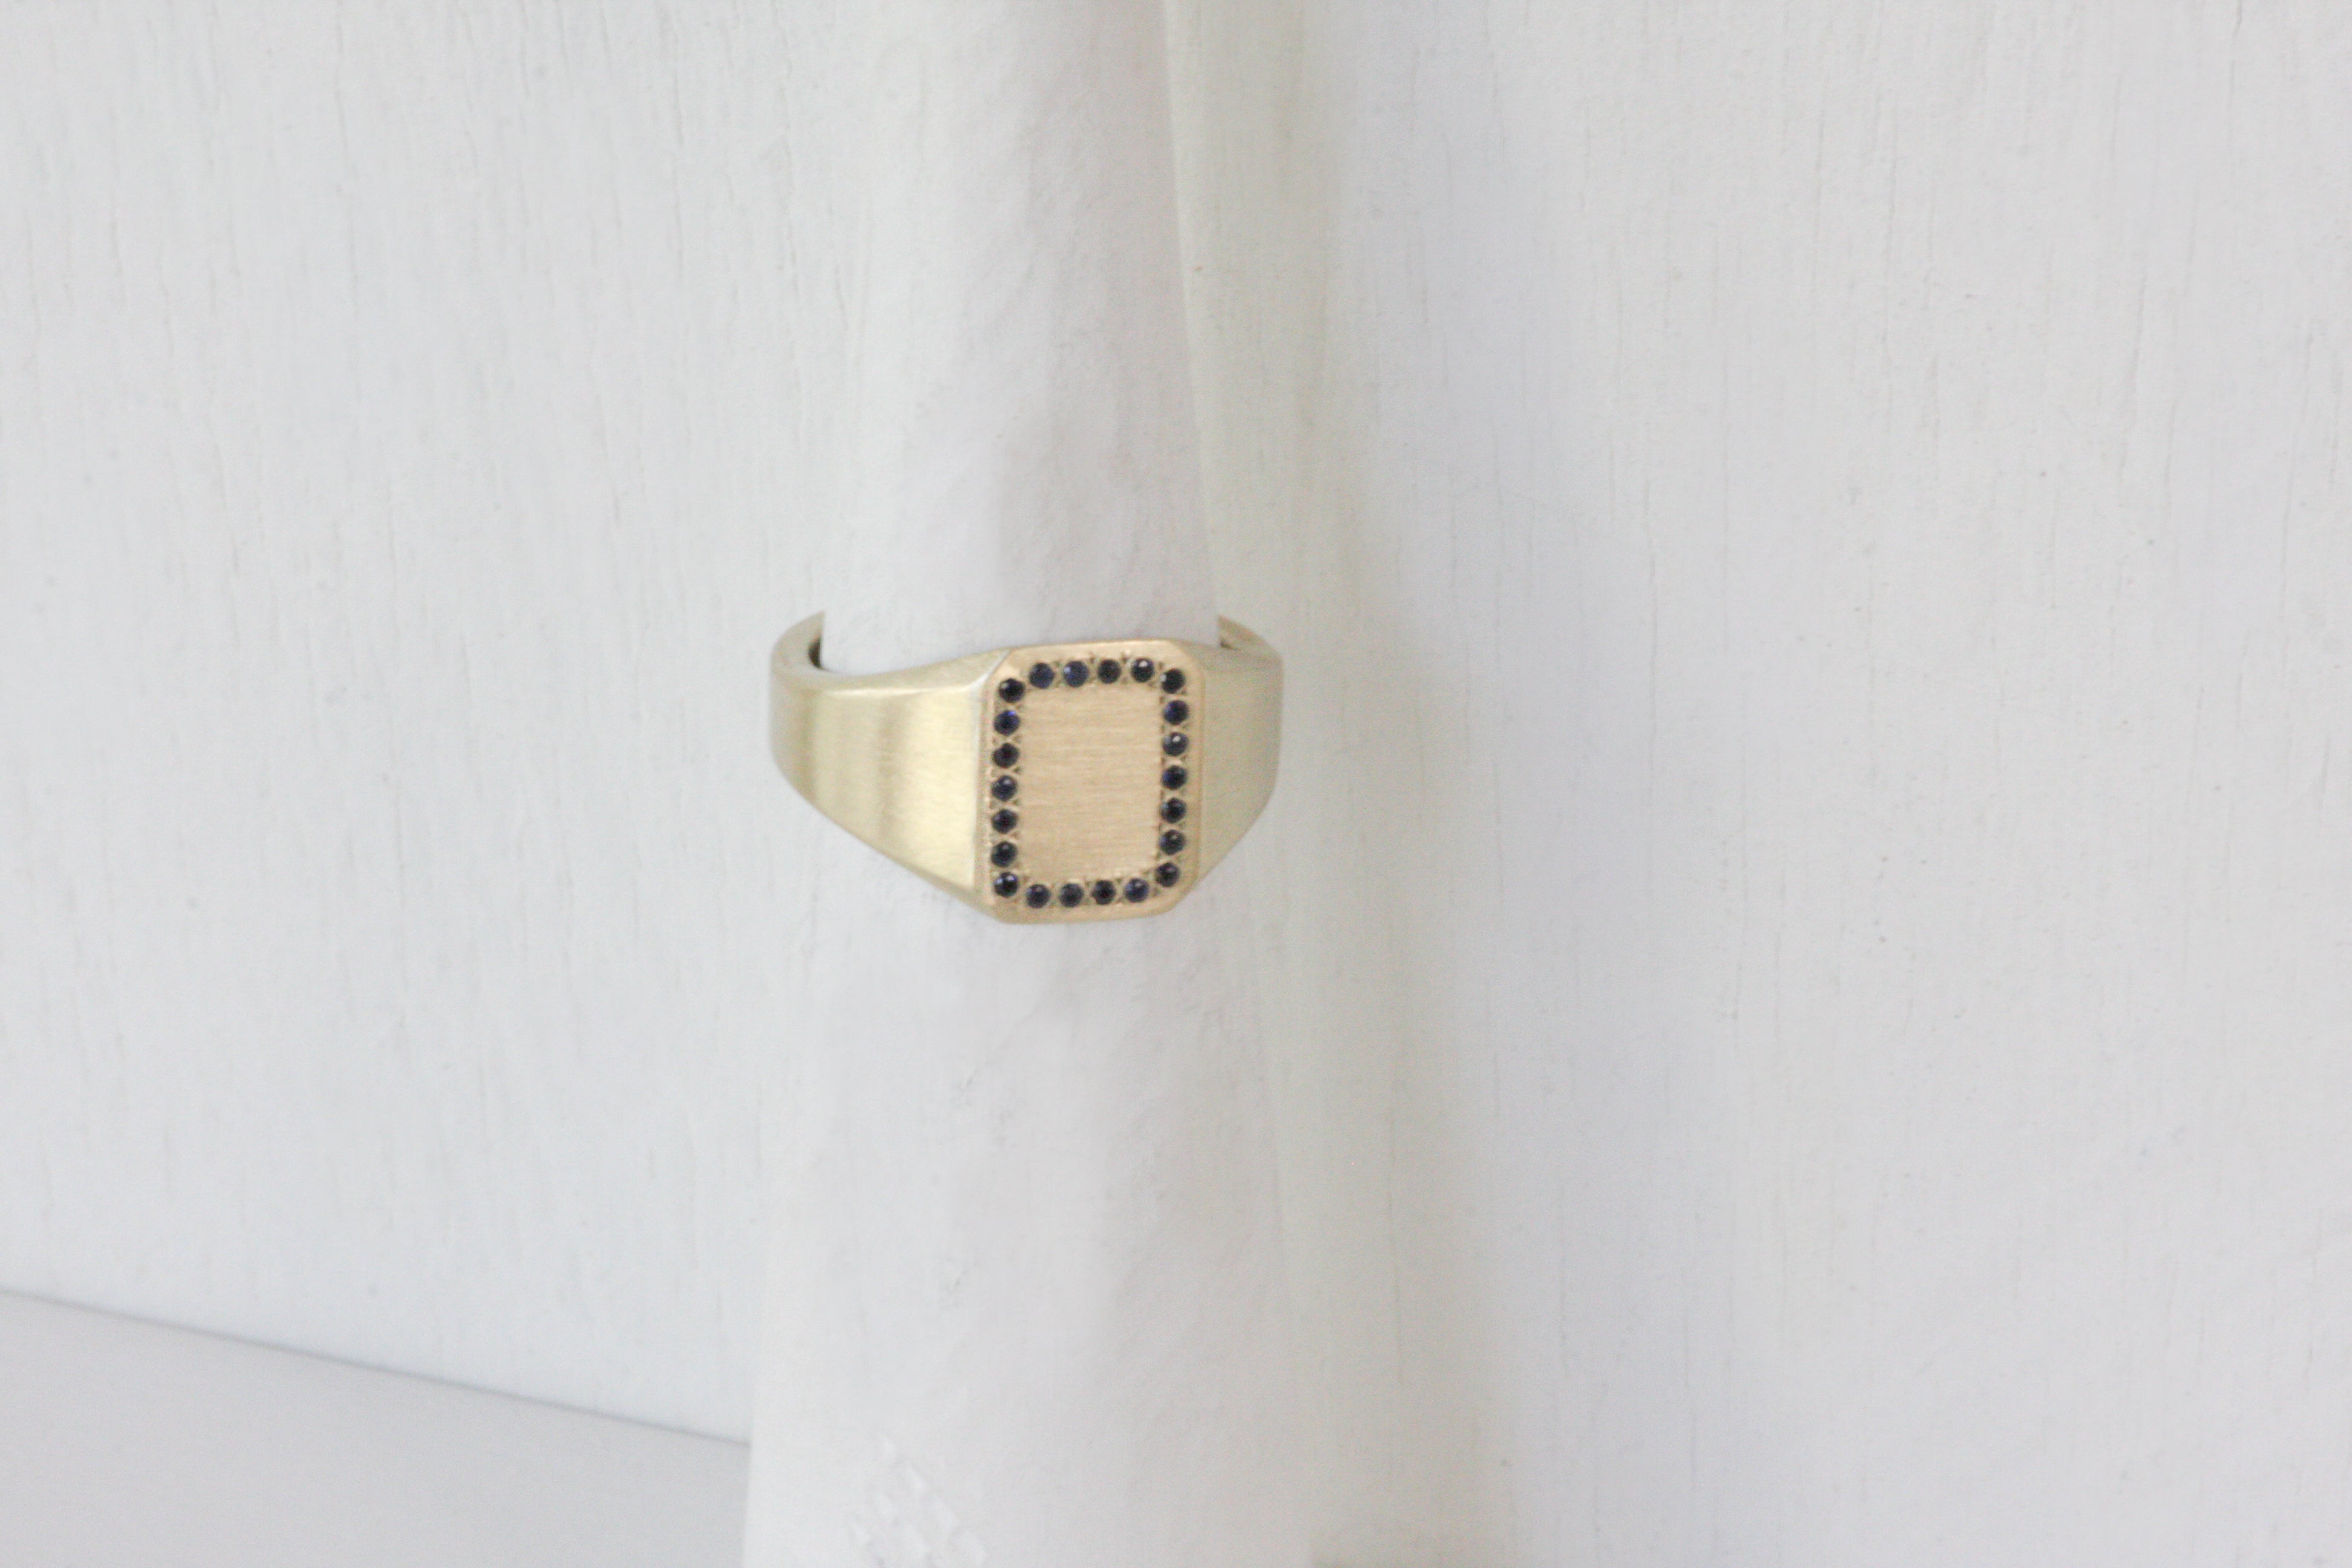 Gold Signet Statement Ring with Sapphires